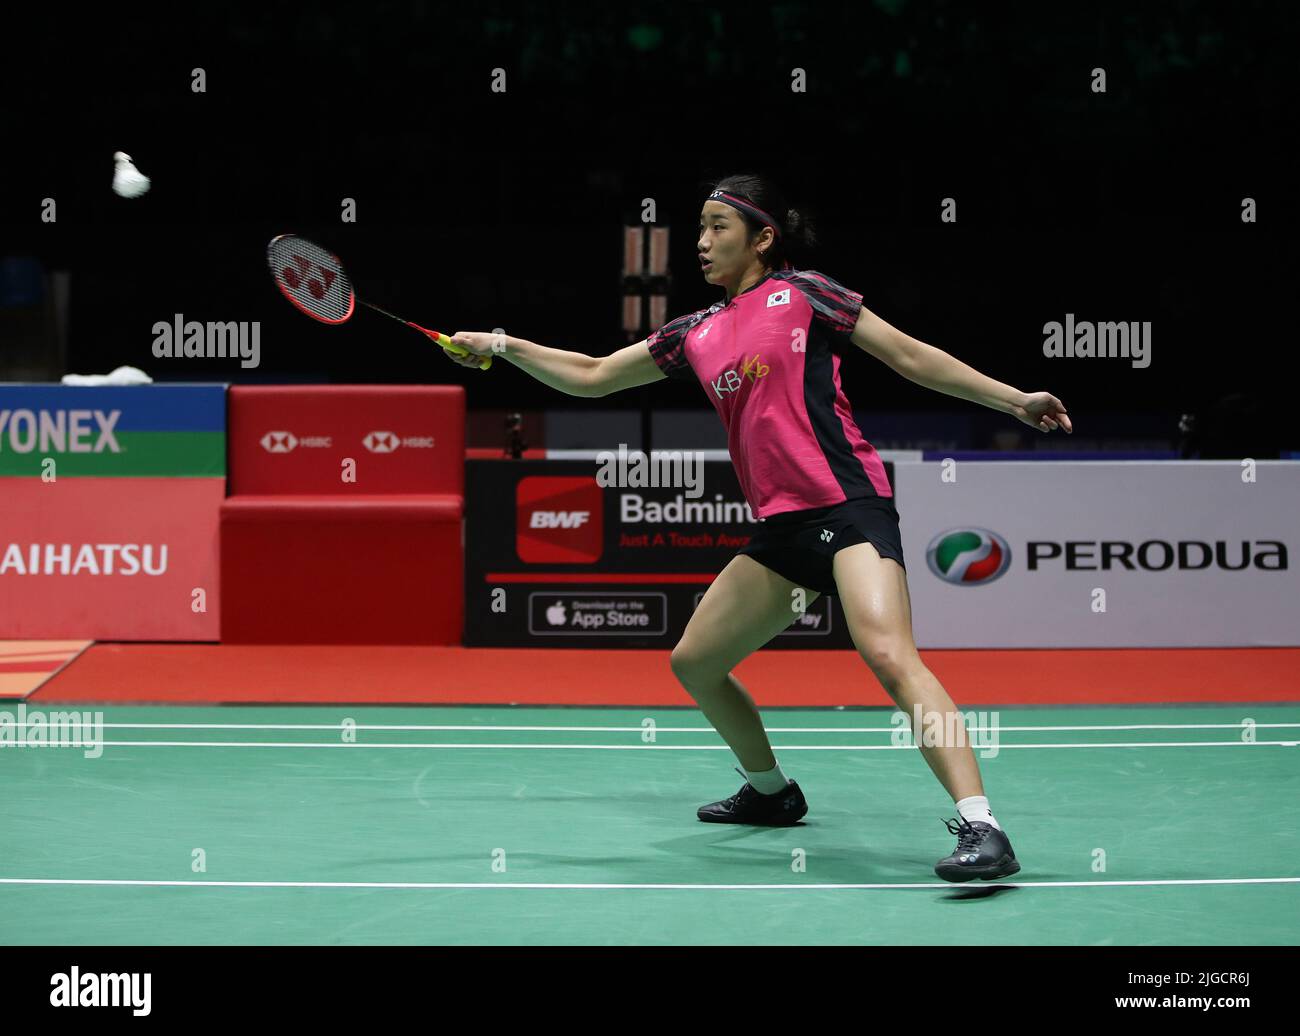 Kuala Lumpur Malaysia 09th July 2022 An Se Young Of Korea Competes Against Ratchanok Intanon Of Thailand During The Women S Single Semi Finals Match Of The Perodua Malaysia Masters 2022 At Axiata Arena